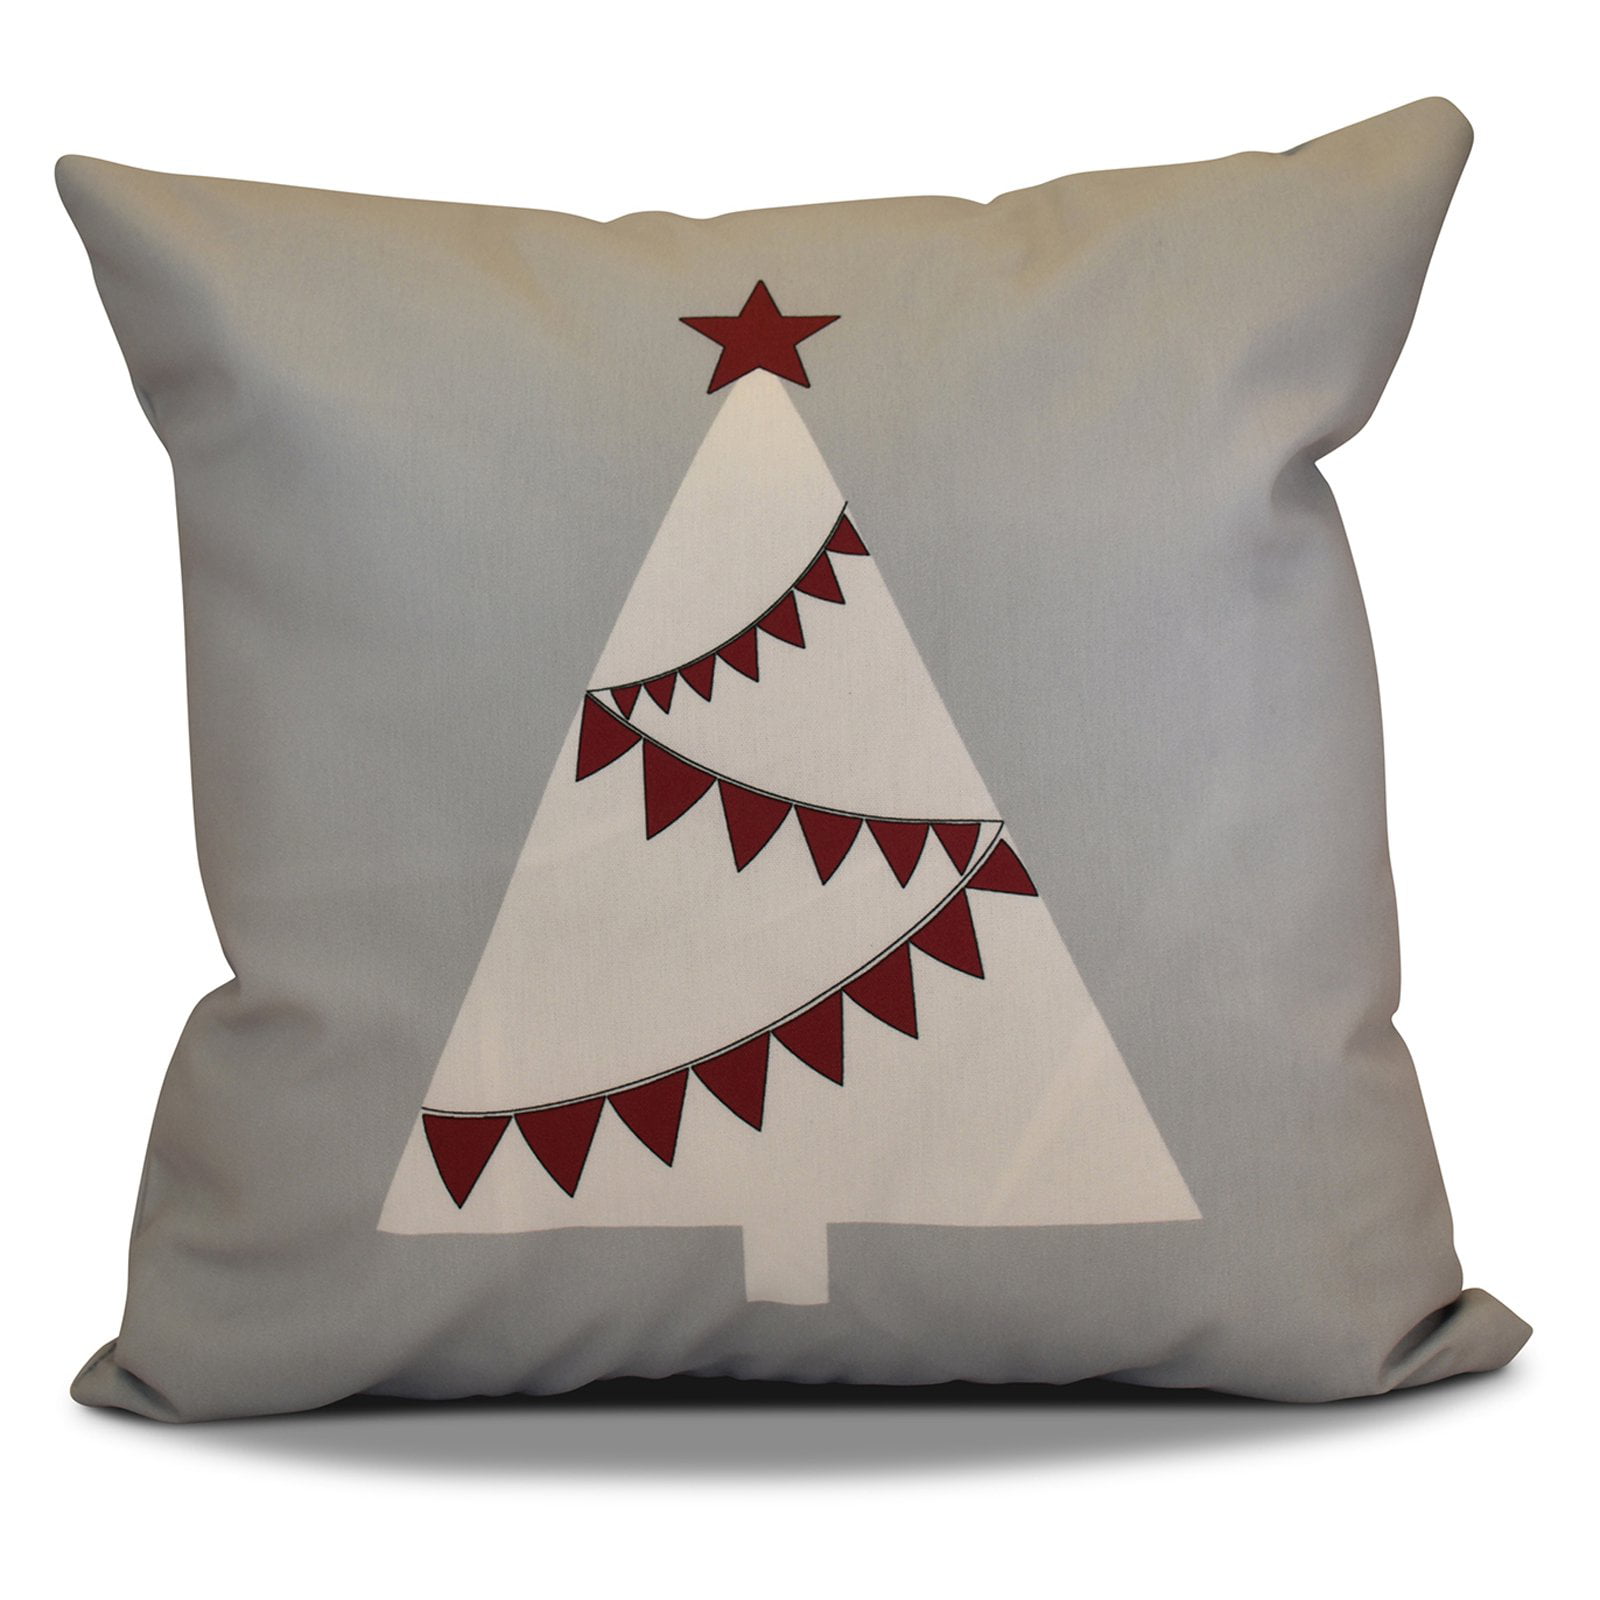 Garland Tree Pillow Gray 18x18 Black E by design PHGN705GY1RE6-18 18 x 18-inch